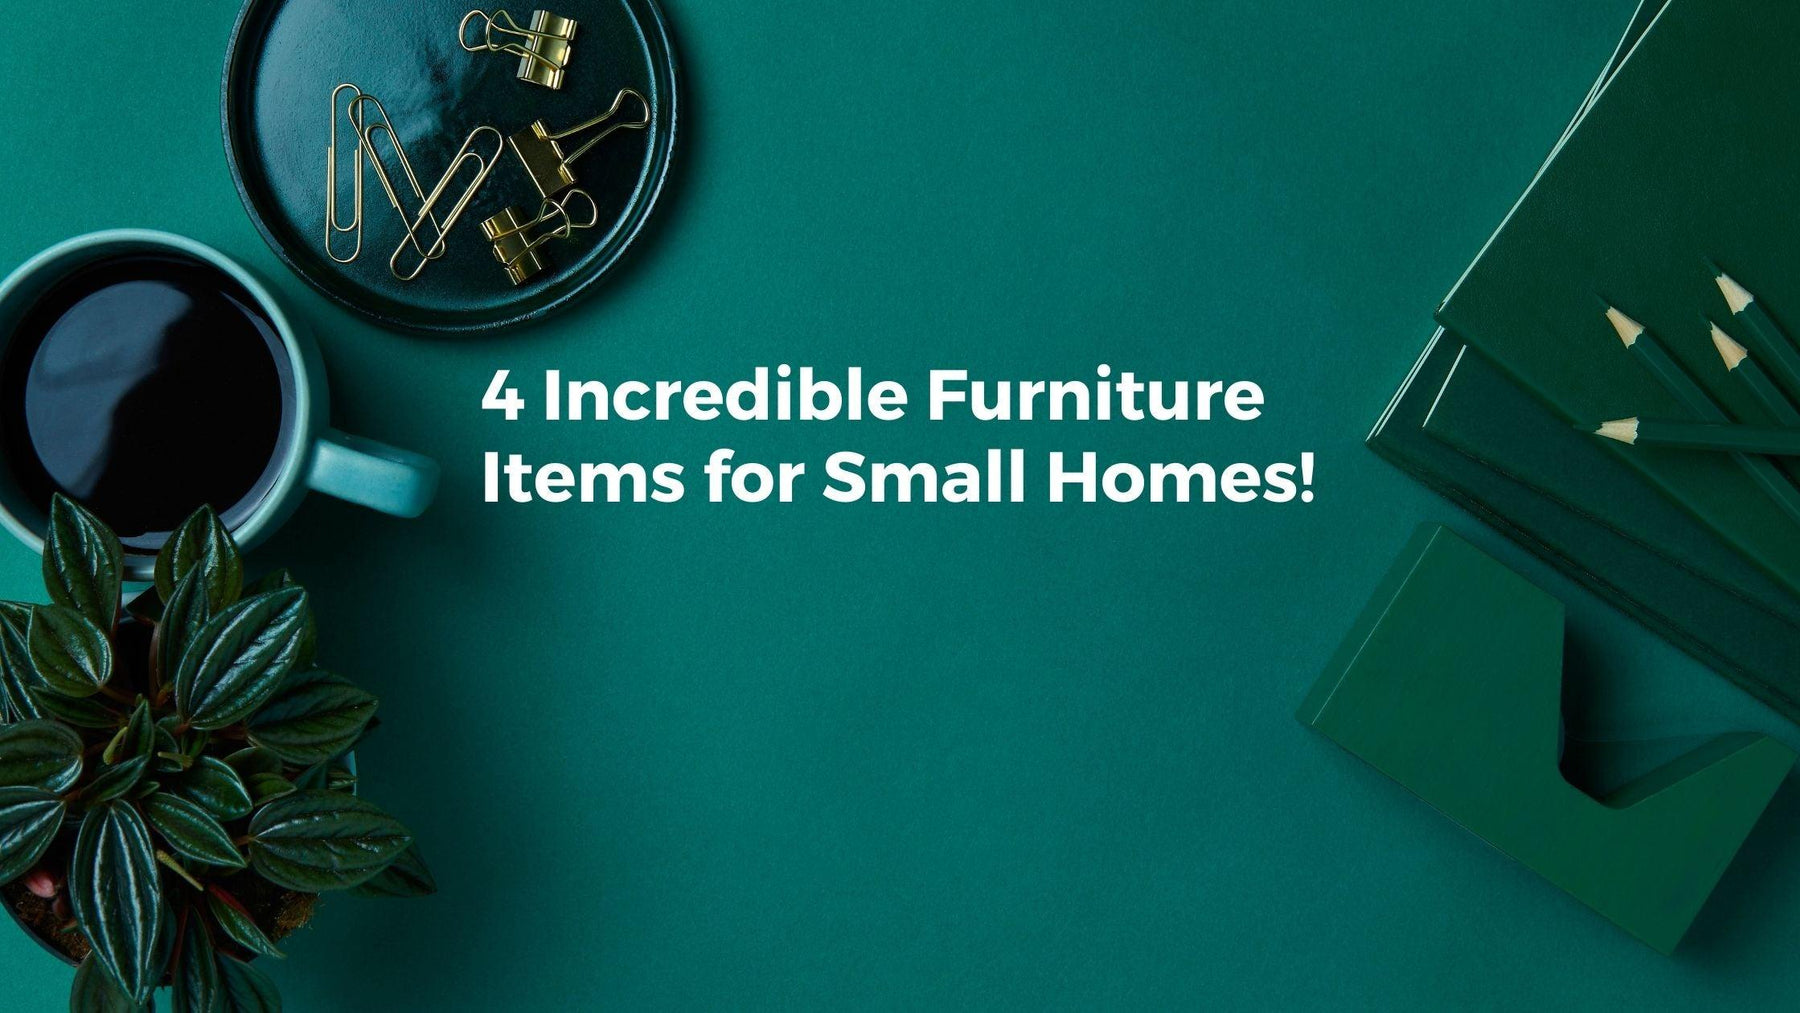 4 Incredible Furniture Items for Small Homes! - WoodenTwist